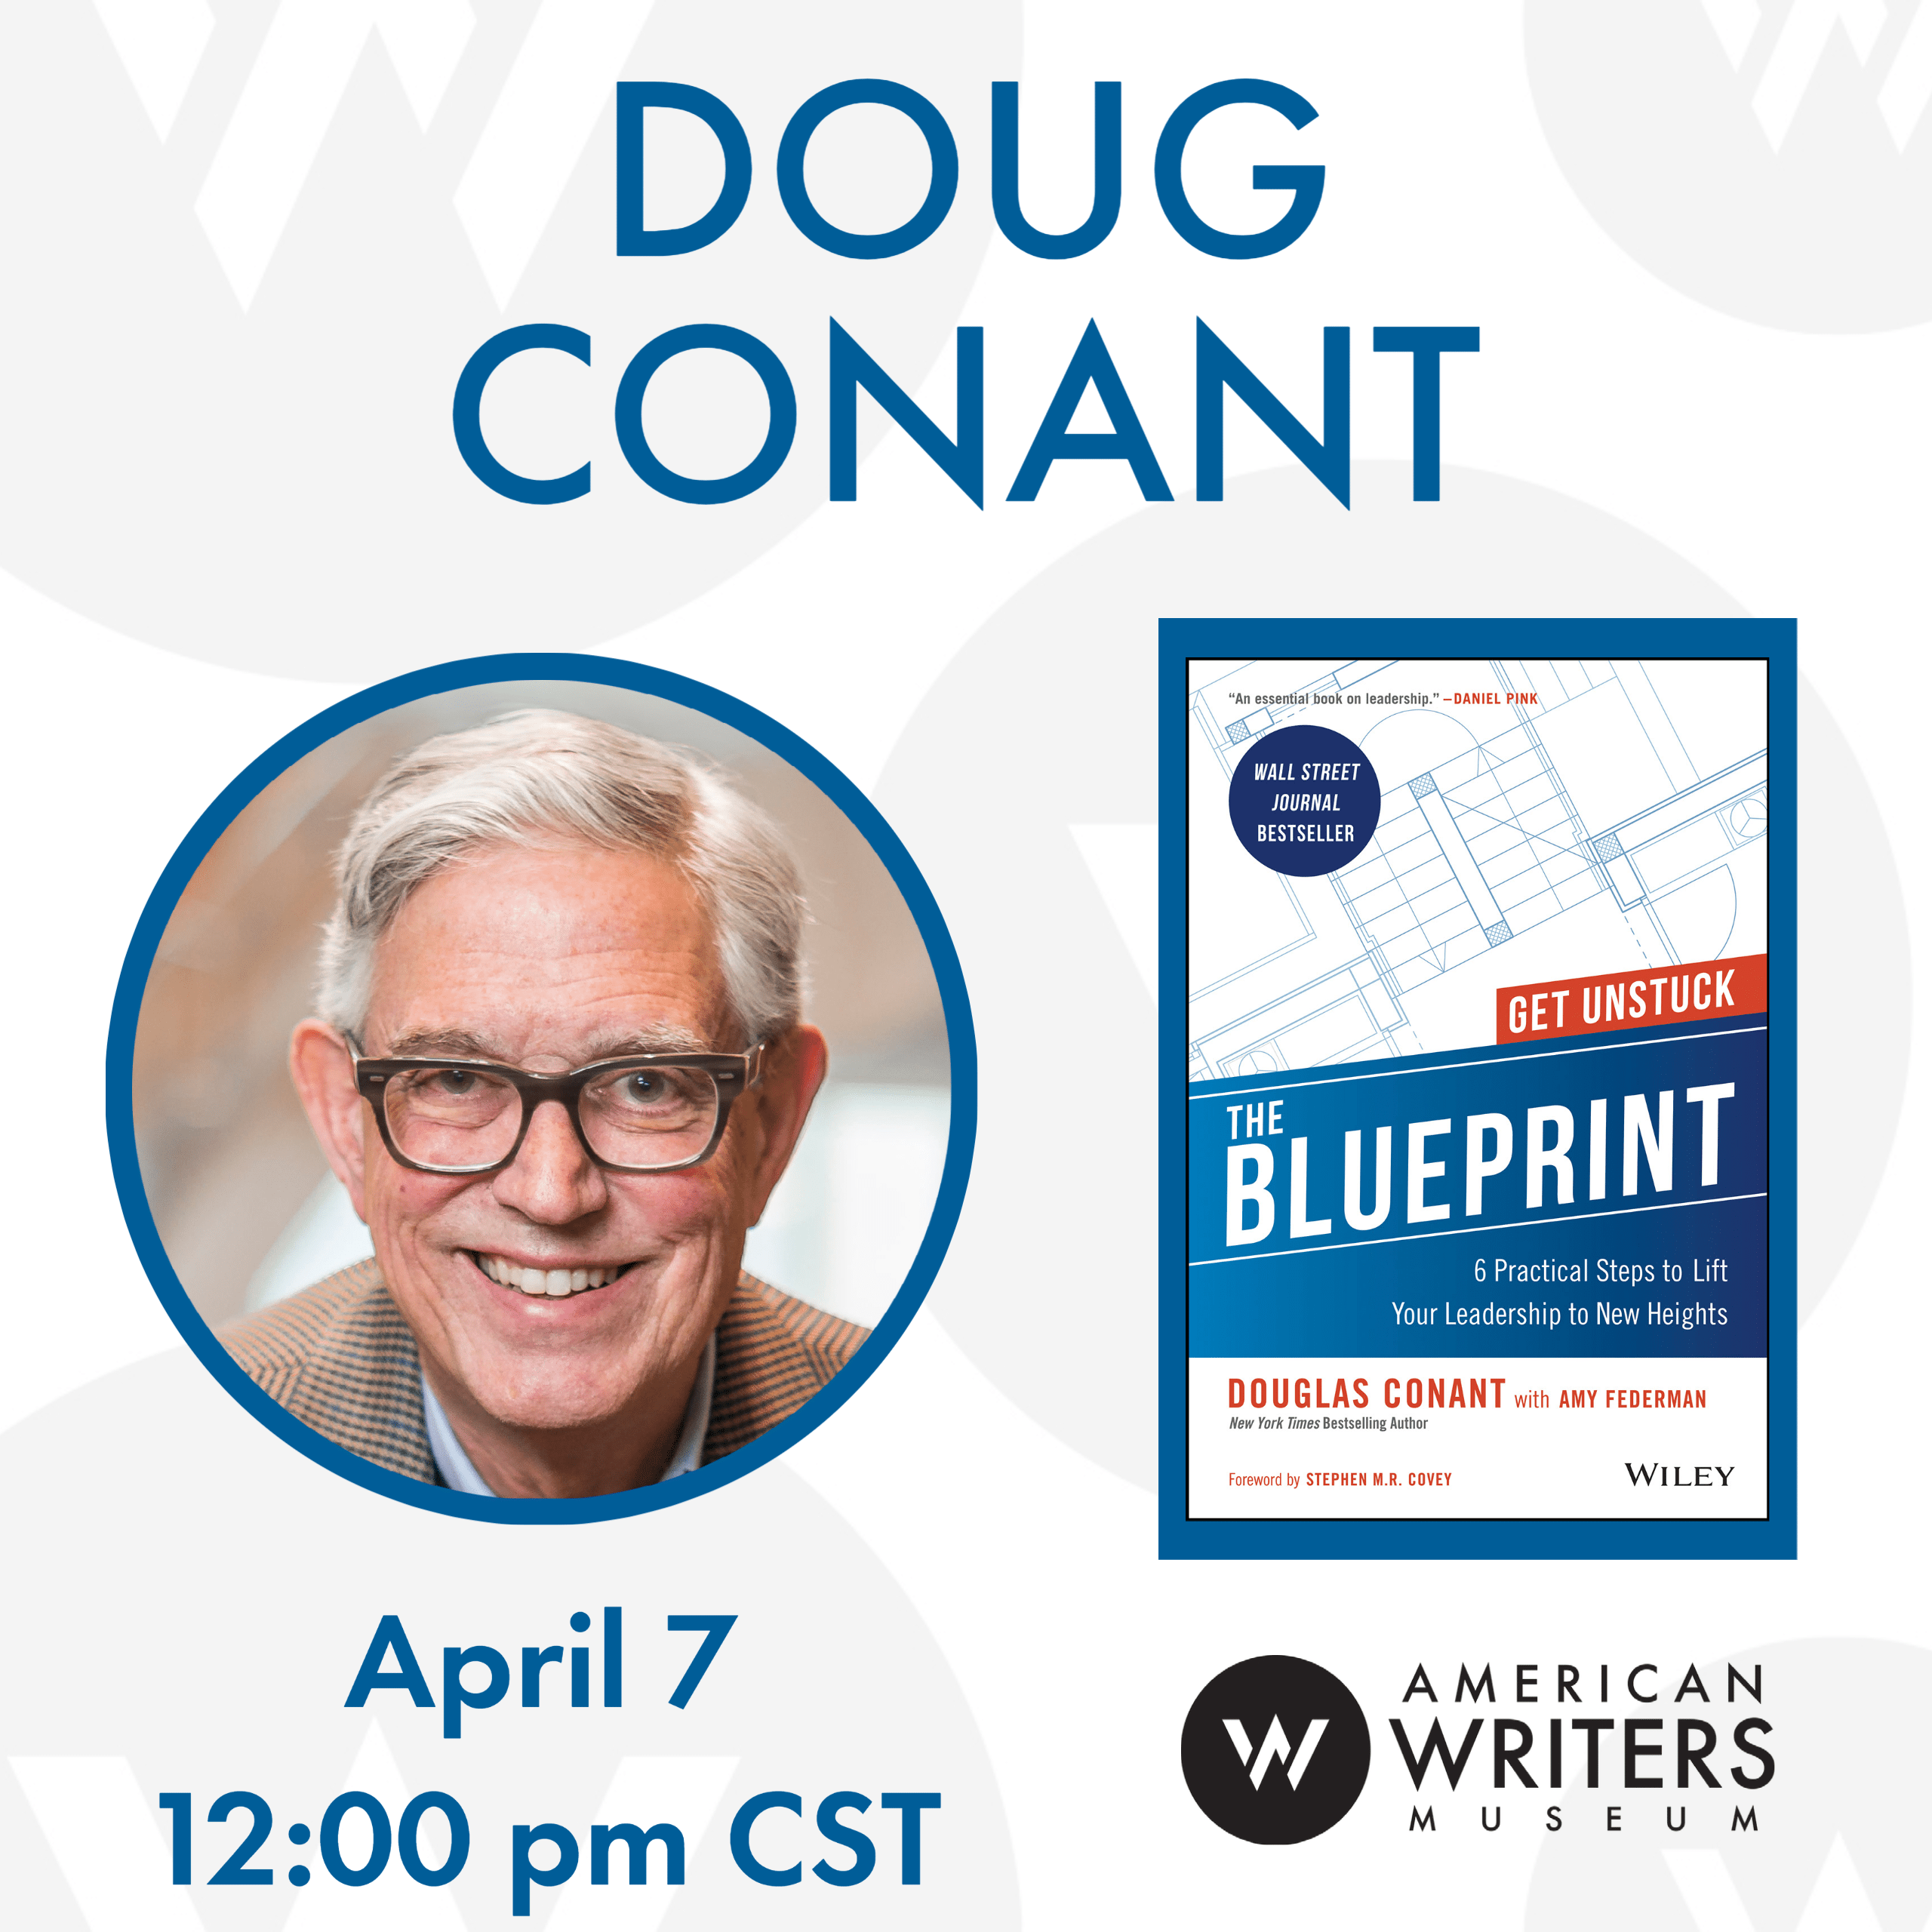 Bestselling author & Fortune 500 CEO Doug Conant discusses his book The Blueprint: 6 Practical Steps to Lift Your Leadership to New Heights on April 7 at 12 pm Central